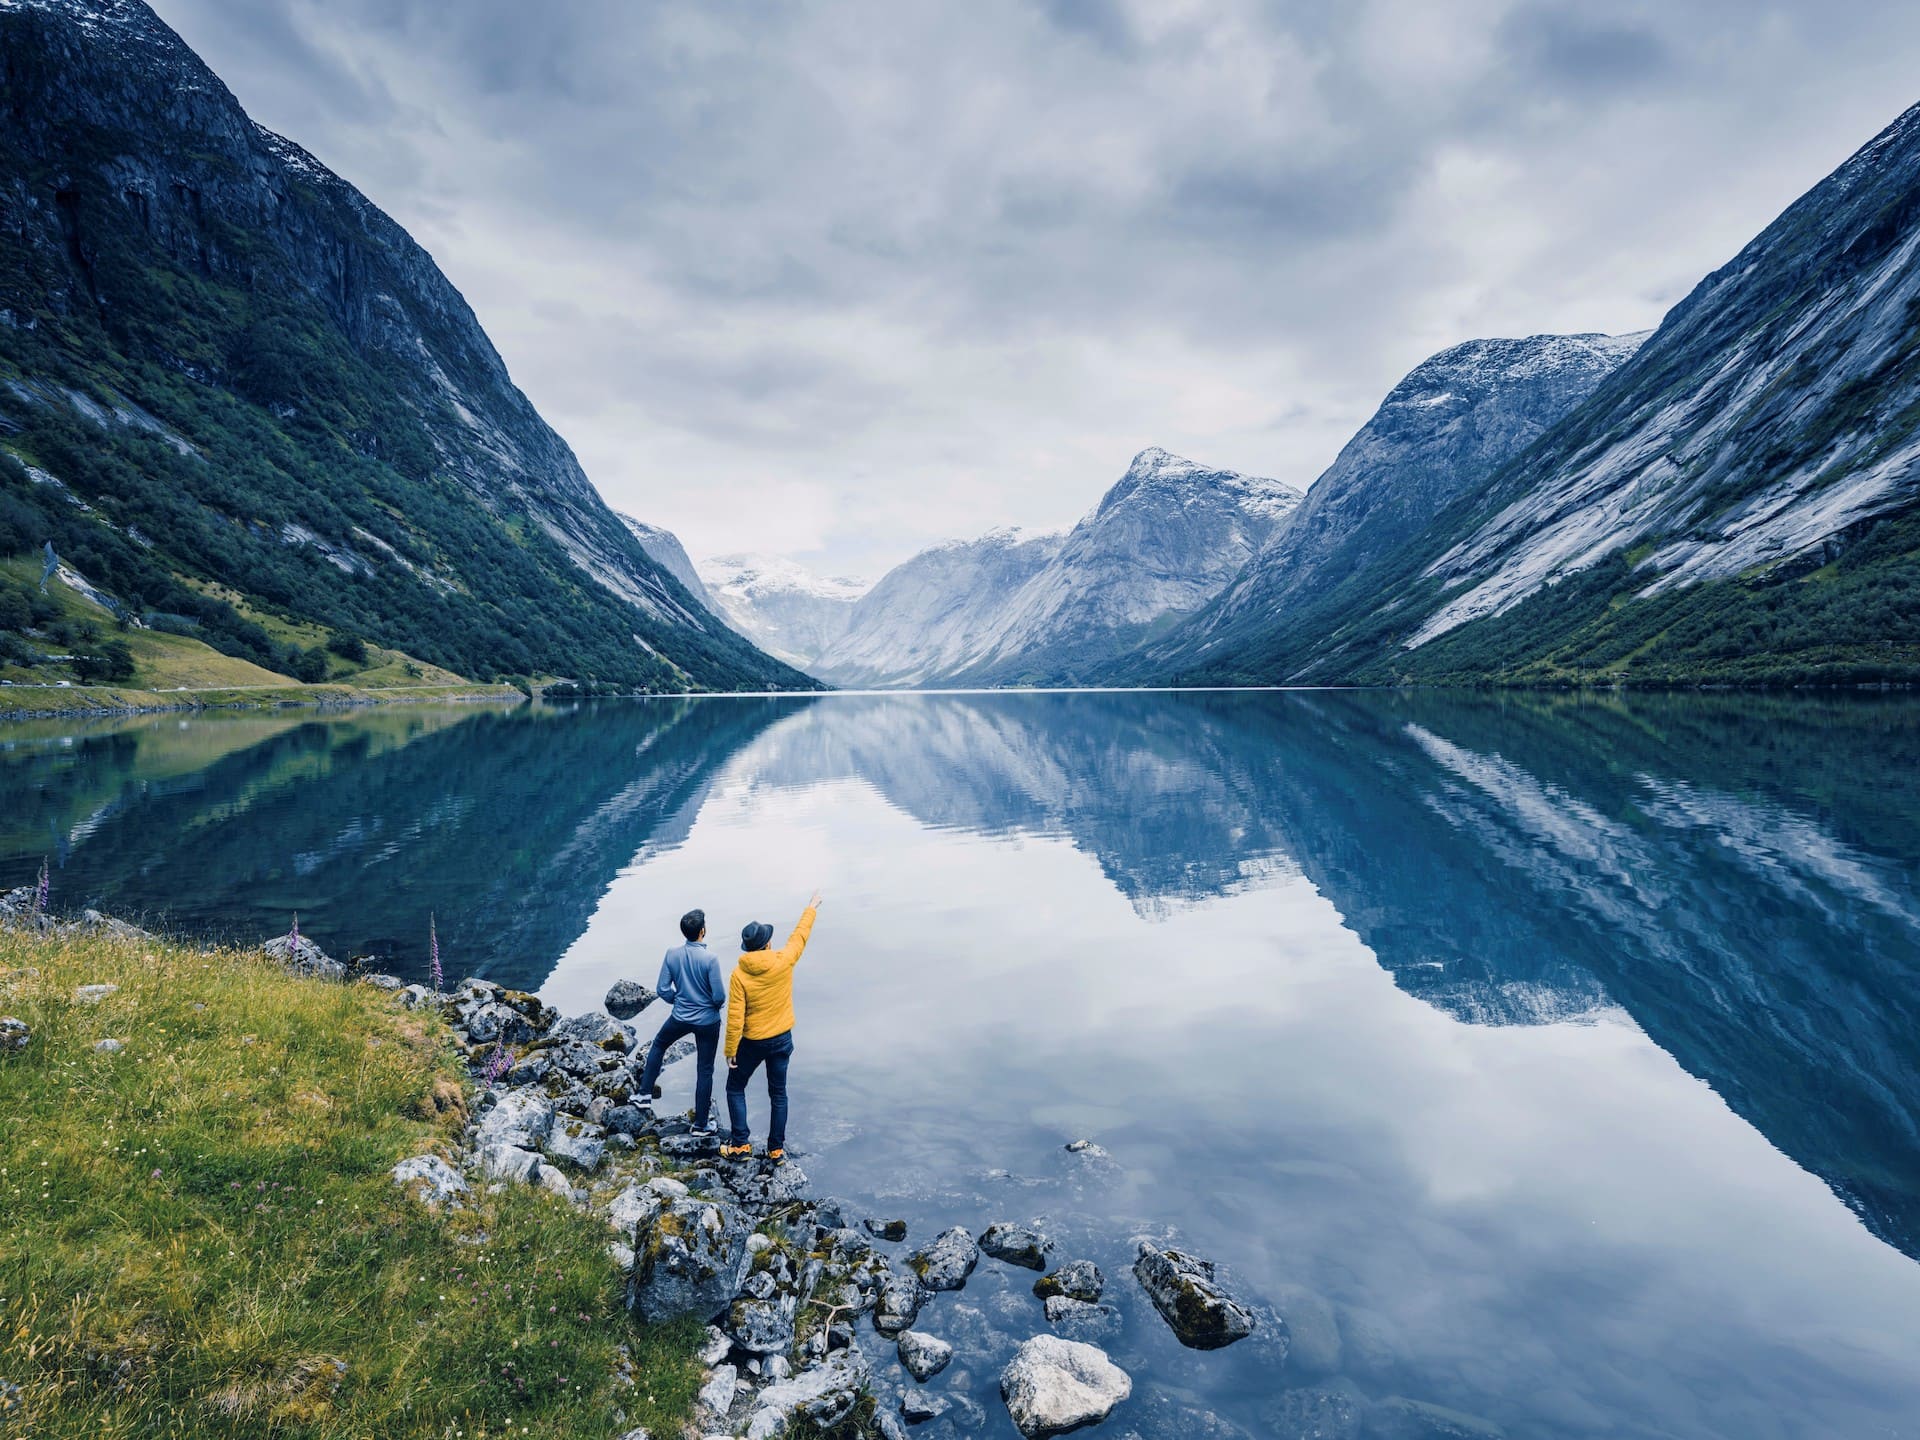 Friends admiring the view on the banks of a Norwegian fjord, Norway